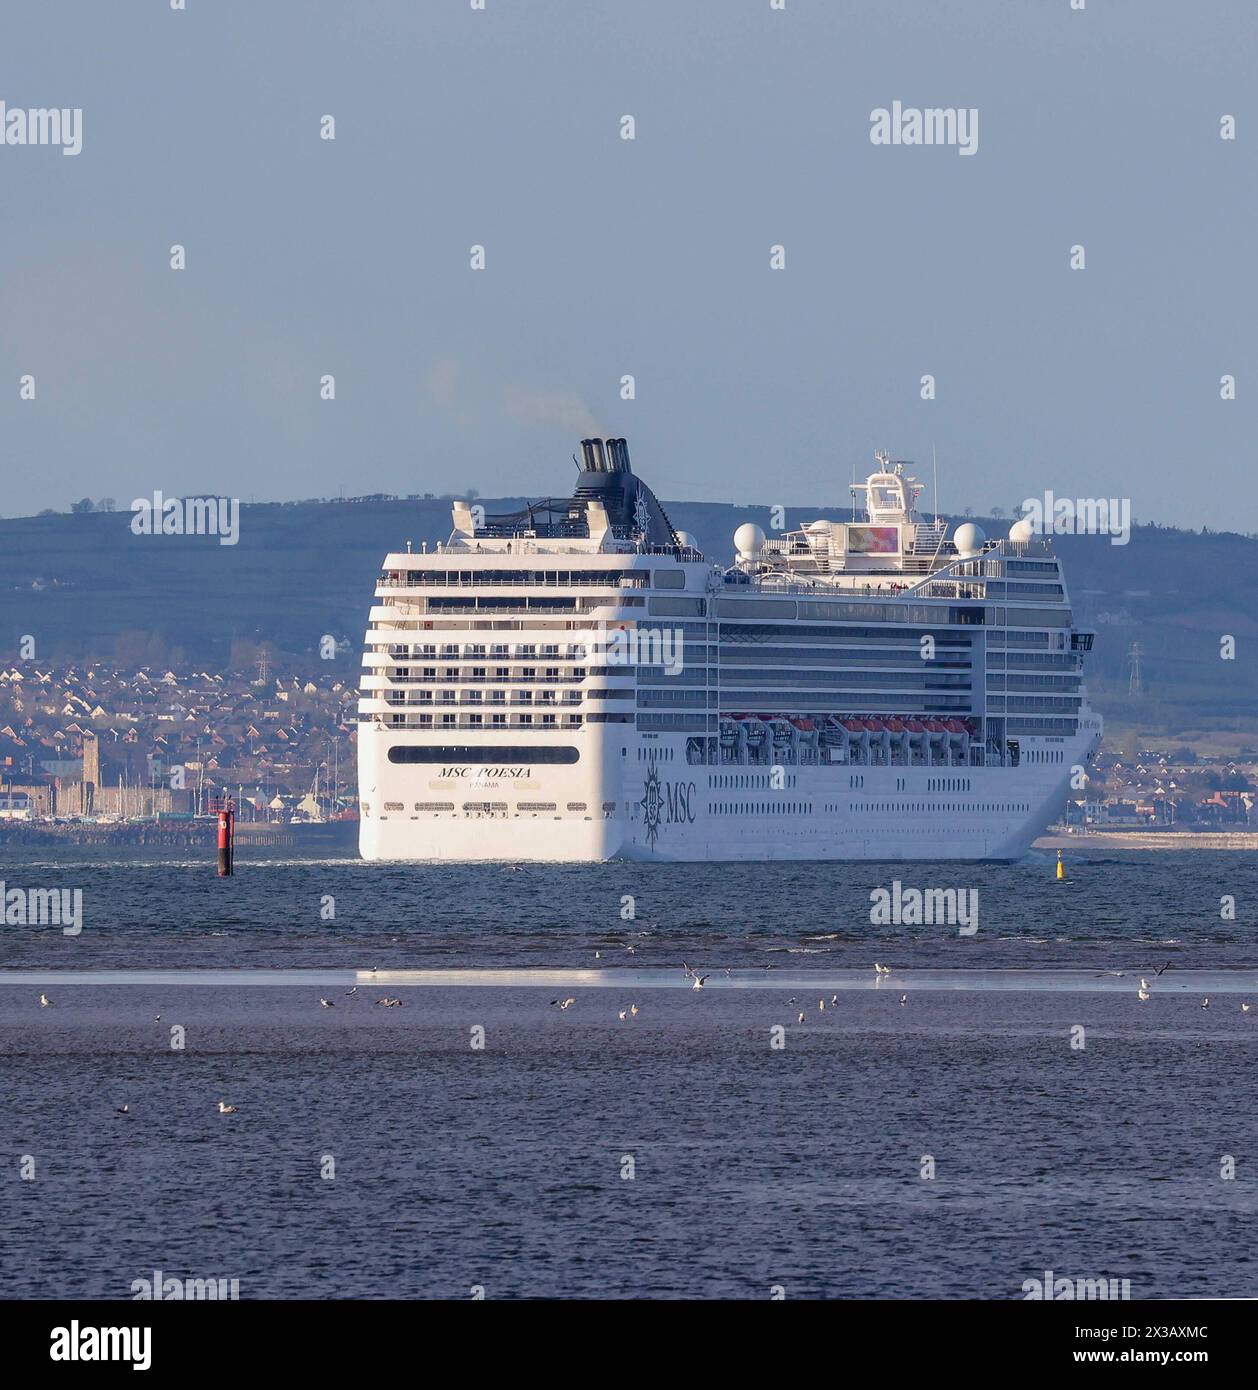 Belfast Lough, County Down, Northern Ireland, UK. 25th Apr 2024. UK weather - a sunny evening on Belfast Lough but still cold in the breeze. The cruise liner MSC Poesia on Belfast Lough leaving the Port of Belfast with the medieval Norman castle, Carrickfergus on the left.  Credit: CAZIMB/Alamy Live News. Stock Photo